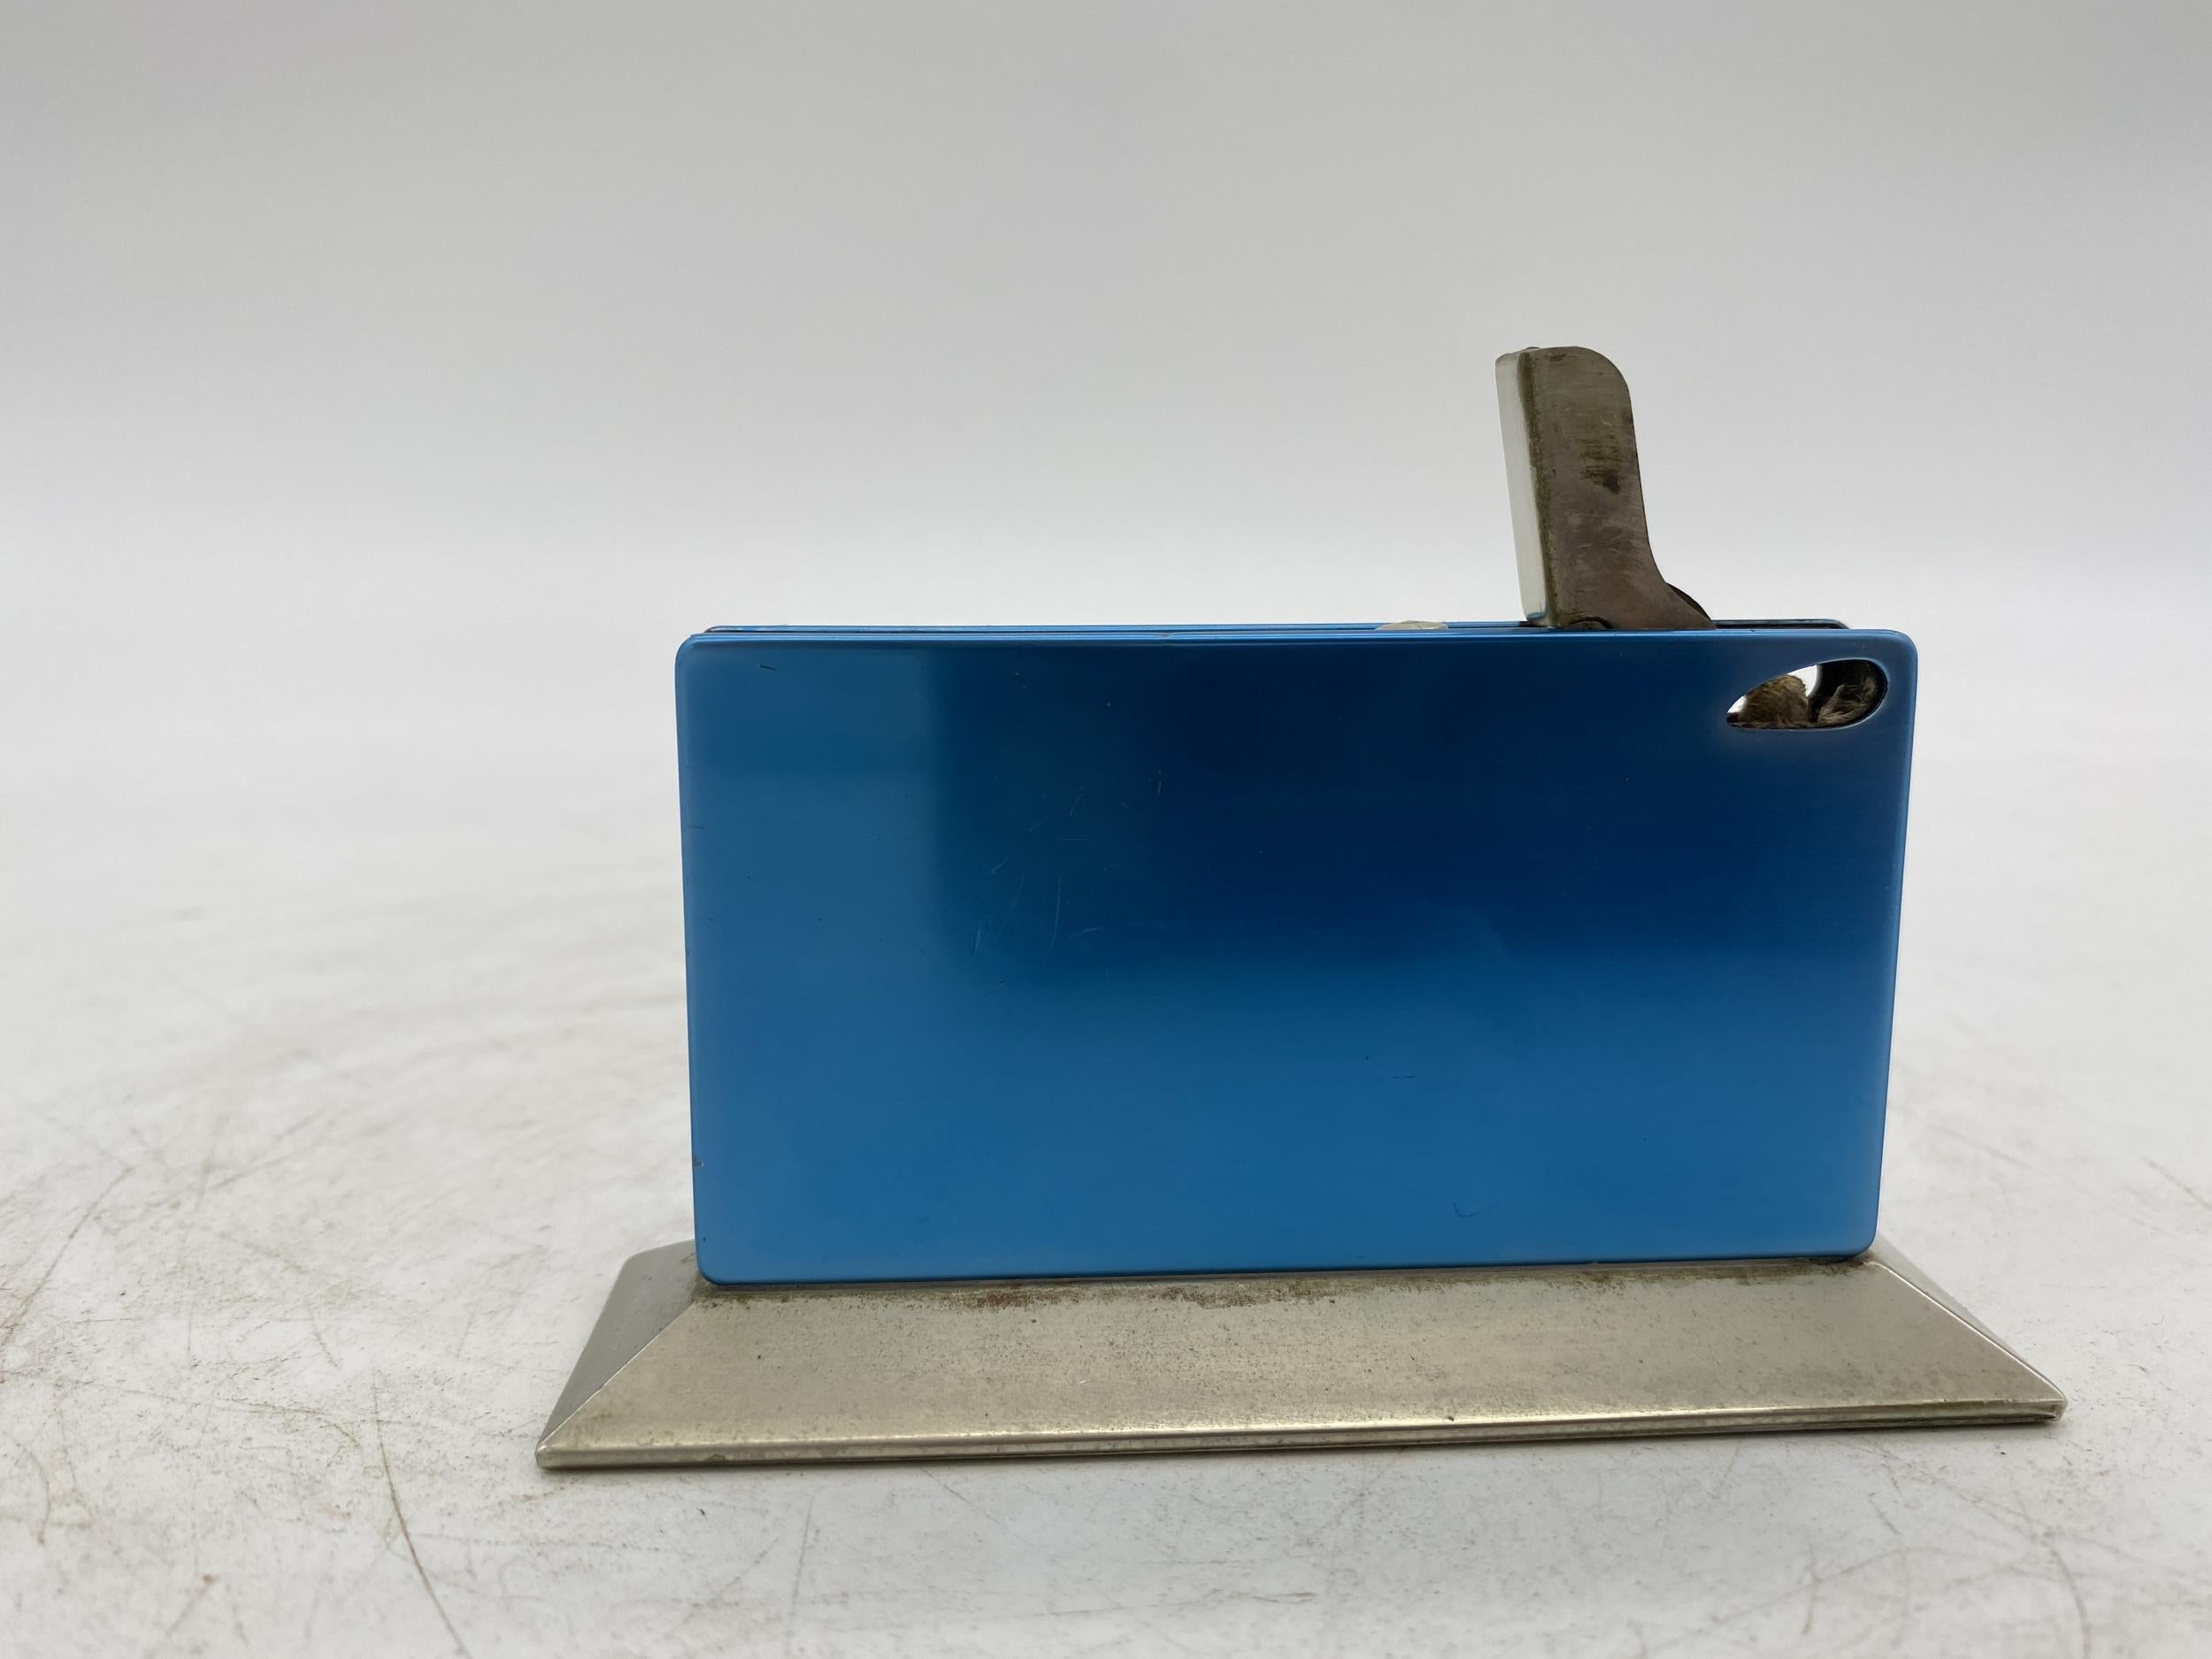 American Blue Anodized Aluminum Table Lighter, Circa 1960 Made in Germany